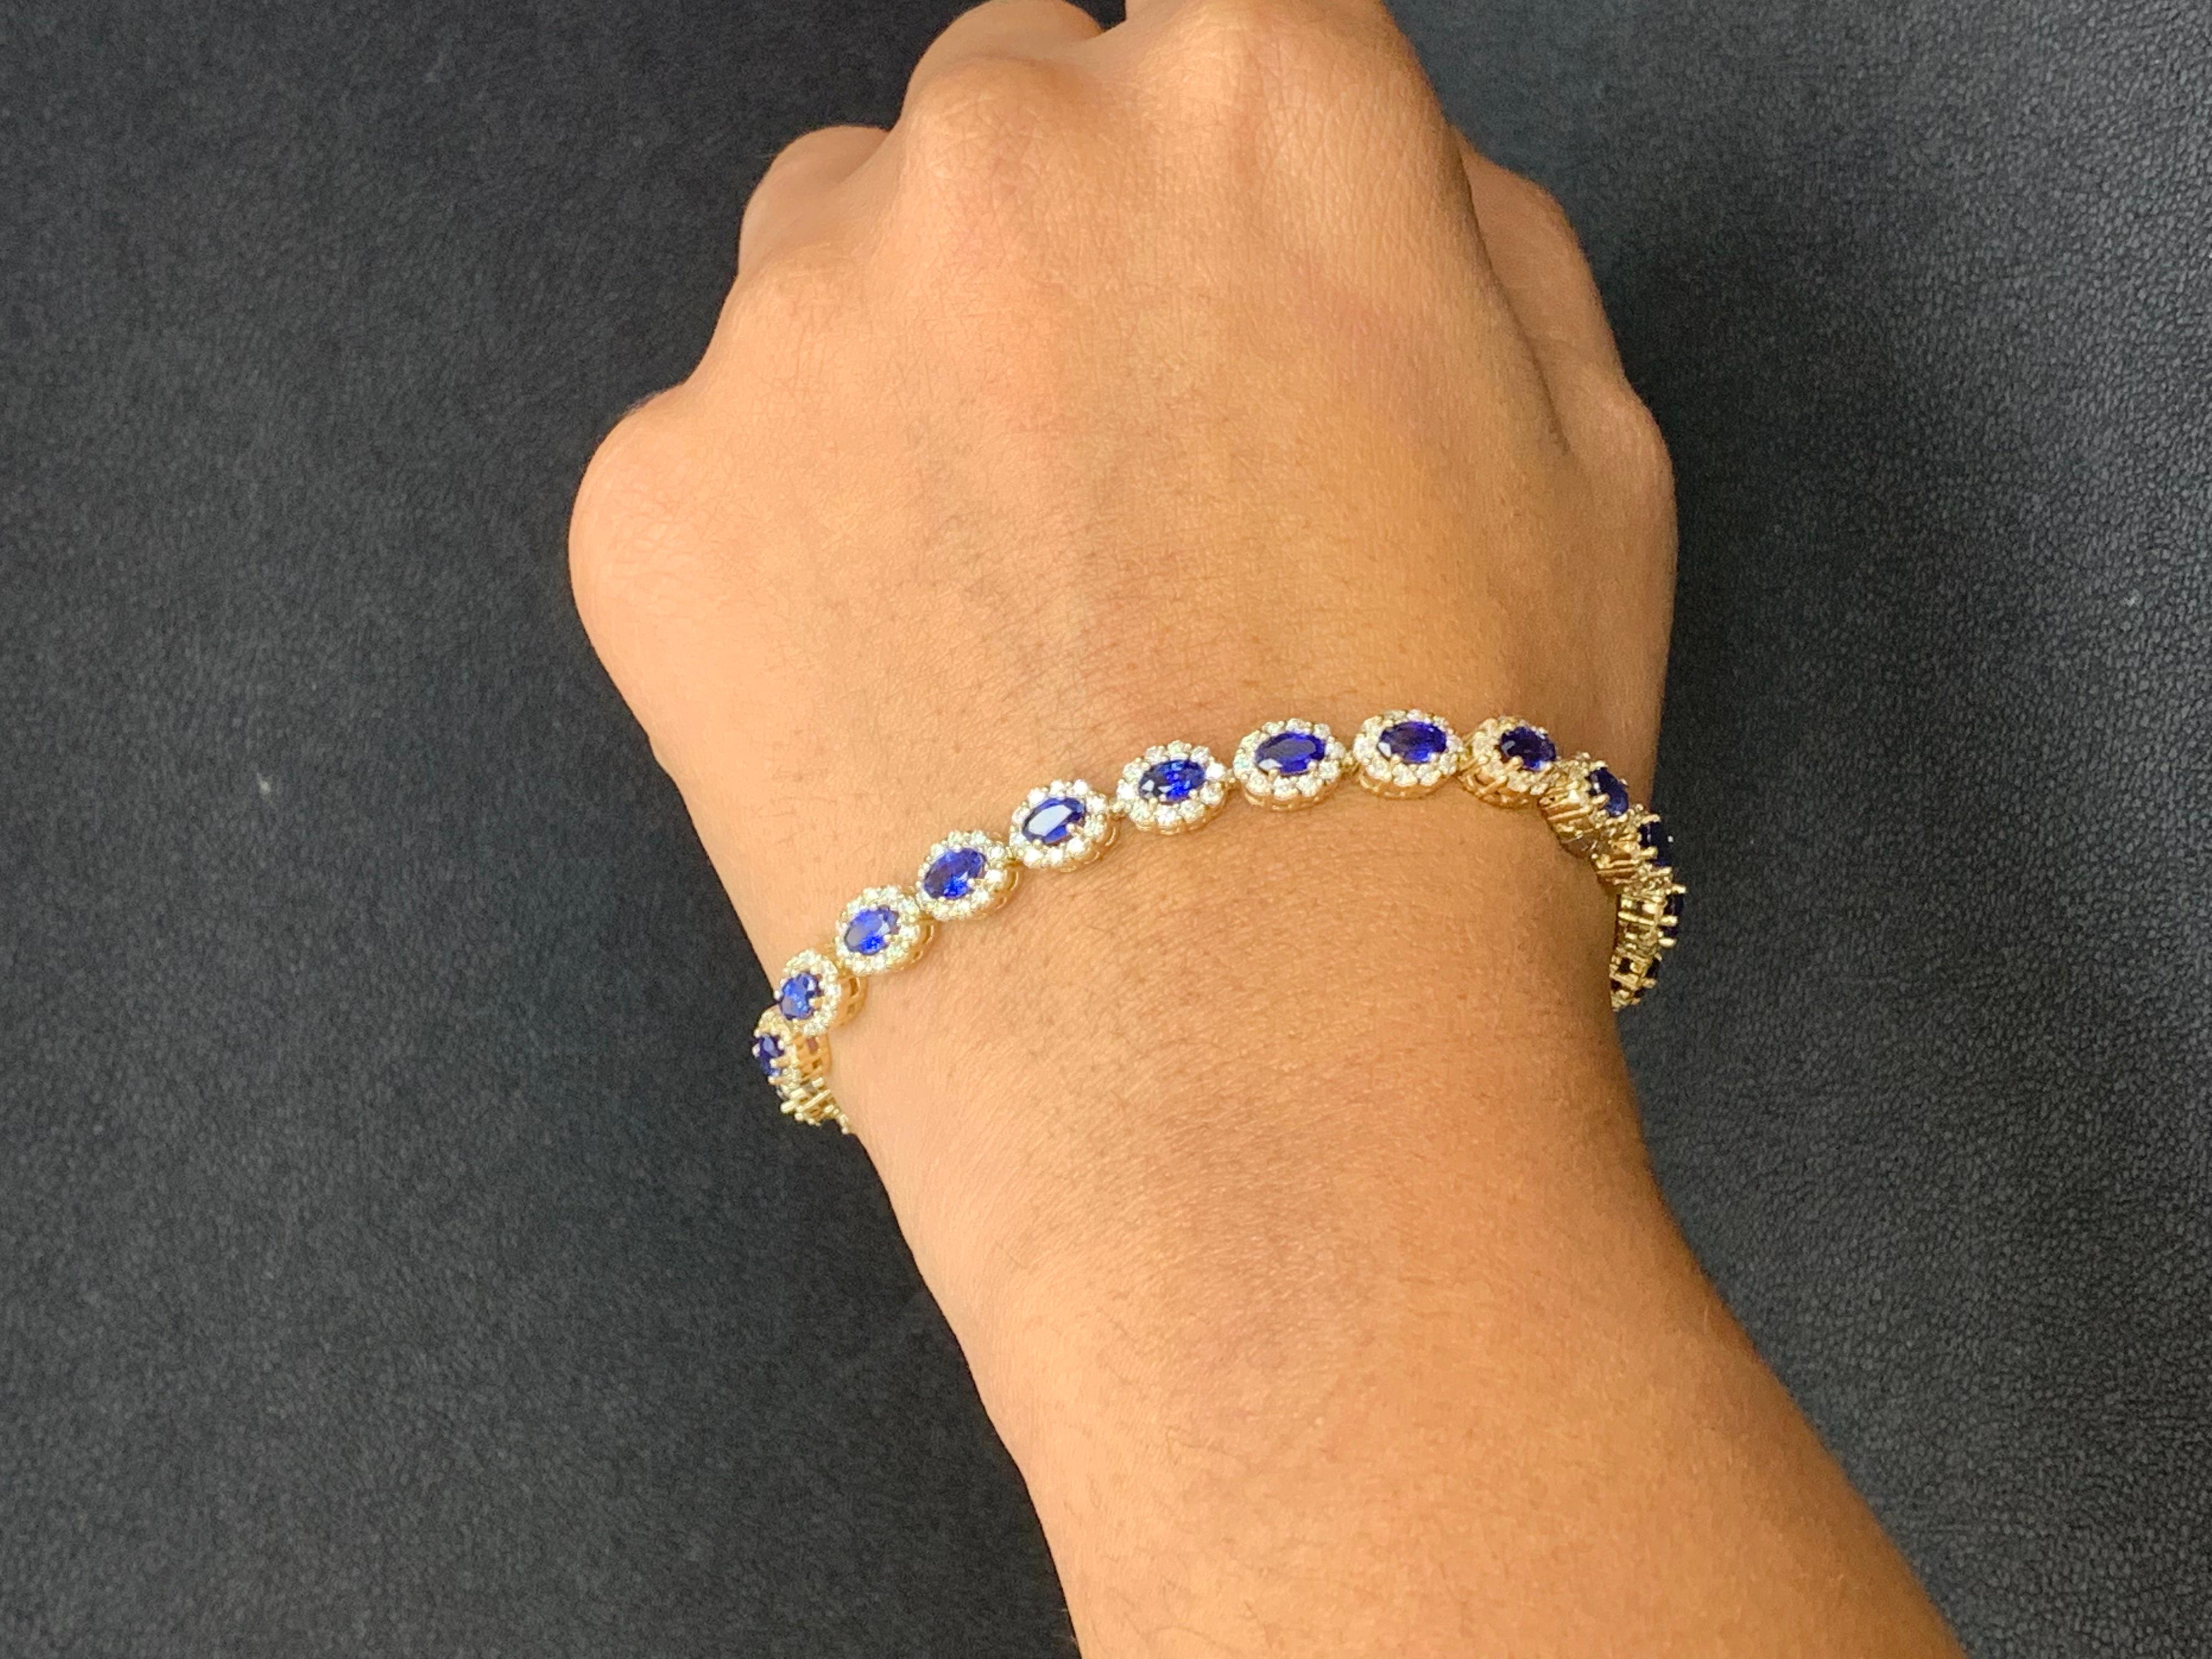 6.24 Carat Oval Cut Blue Sapphire and Diamond Halo Bracelet in 14K Yellow Gold For Sale 3